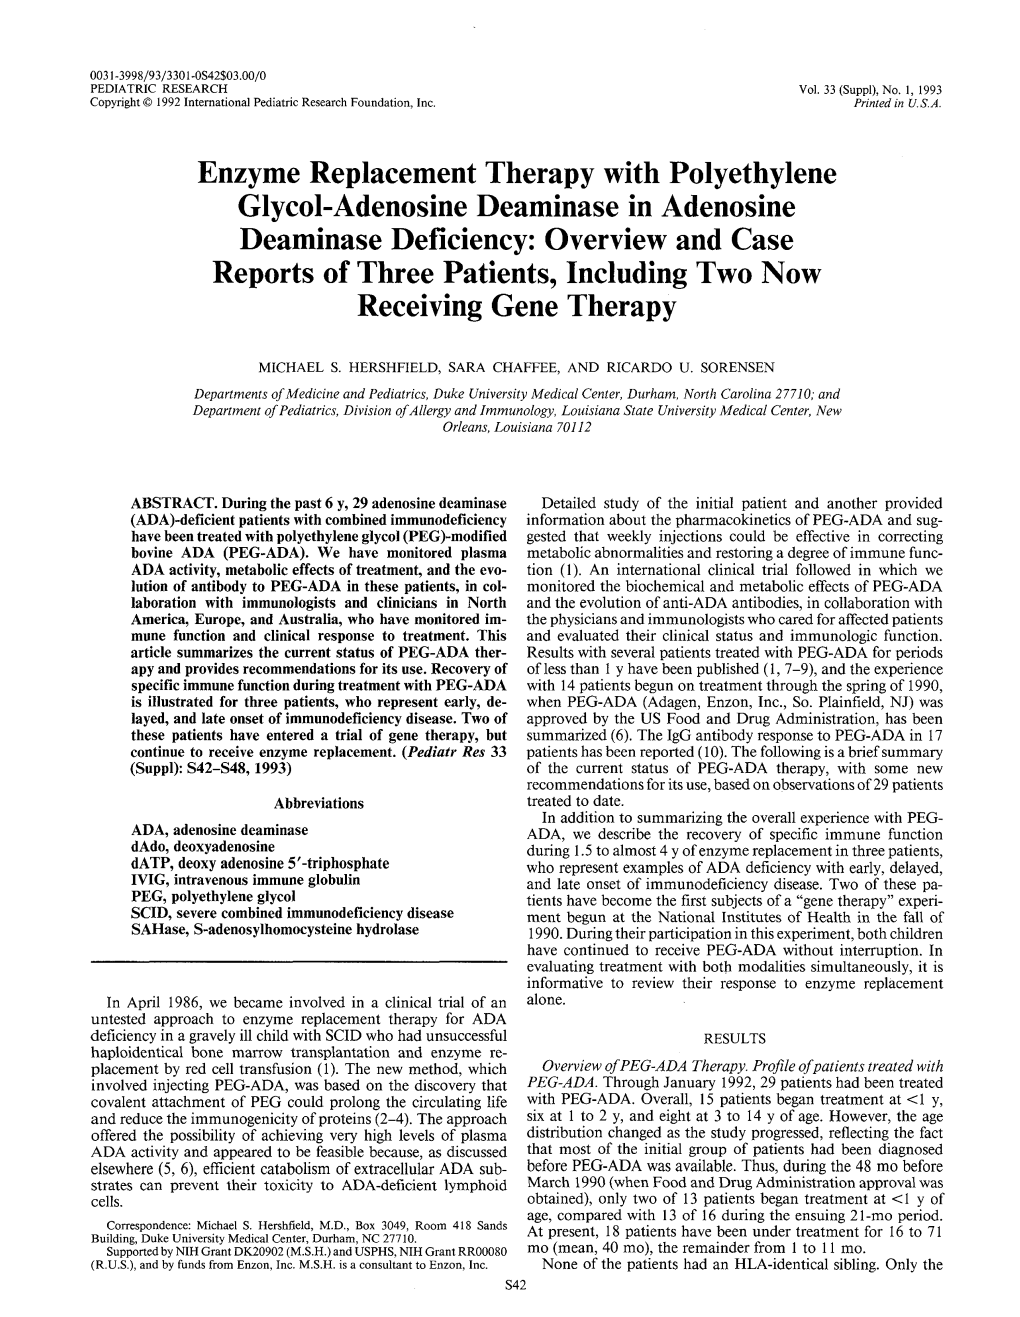 Overview and Case Reports of Three Patients, Including Two Now Receiving Gene Therapy